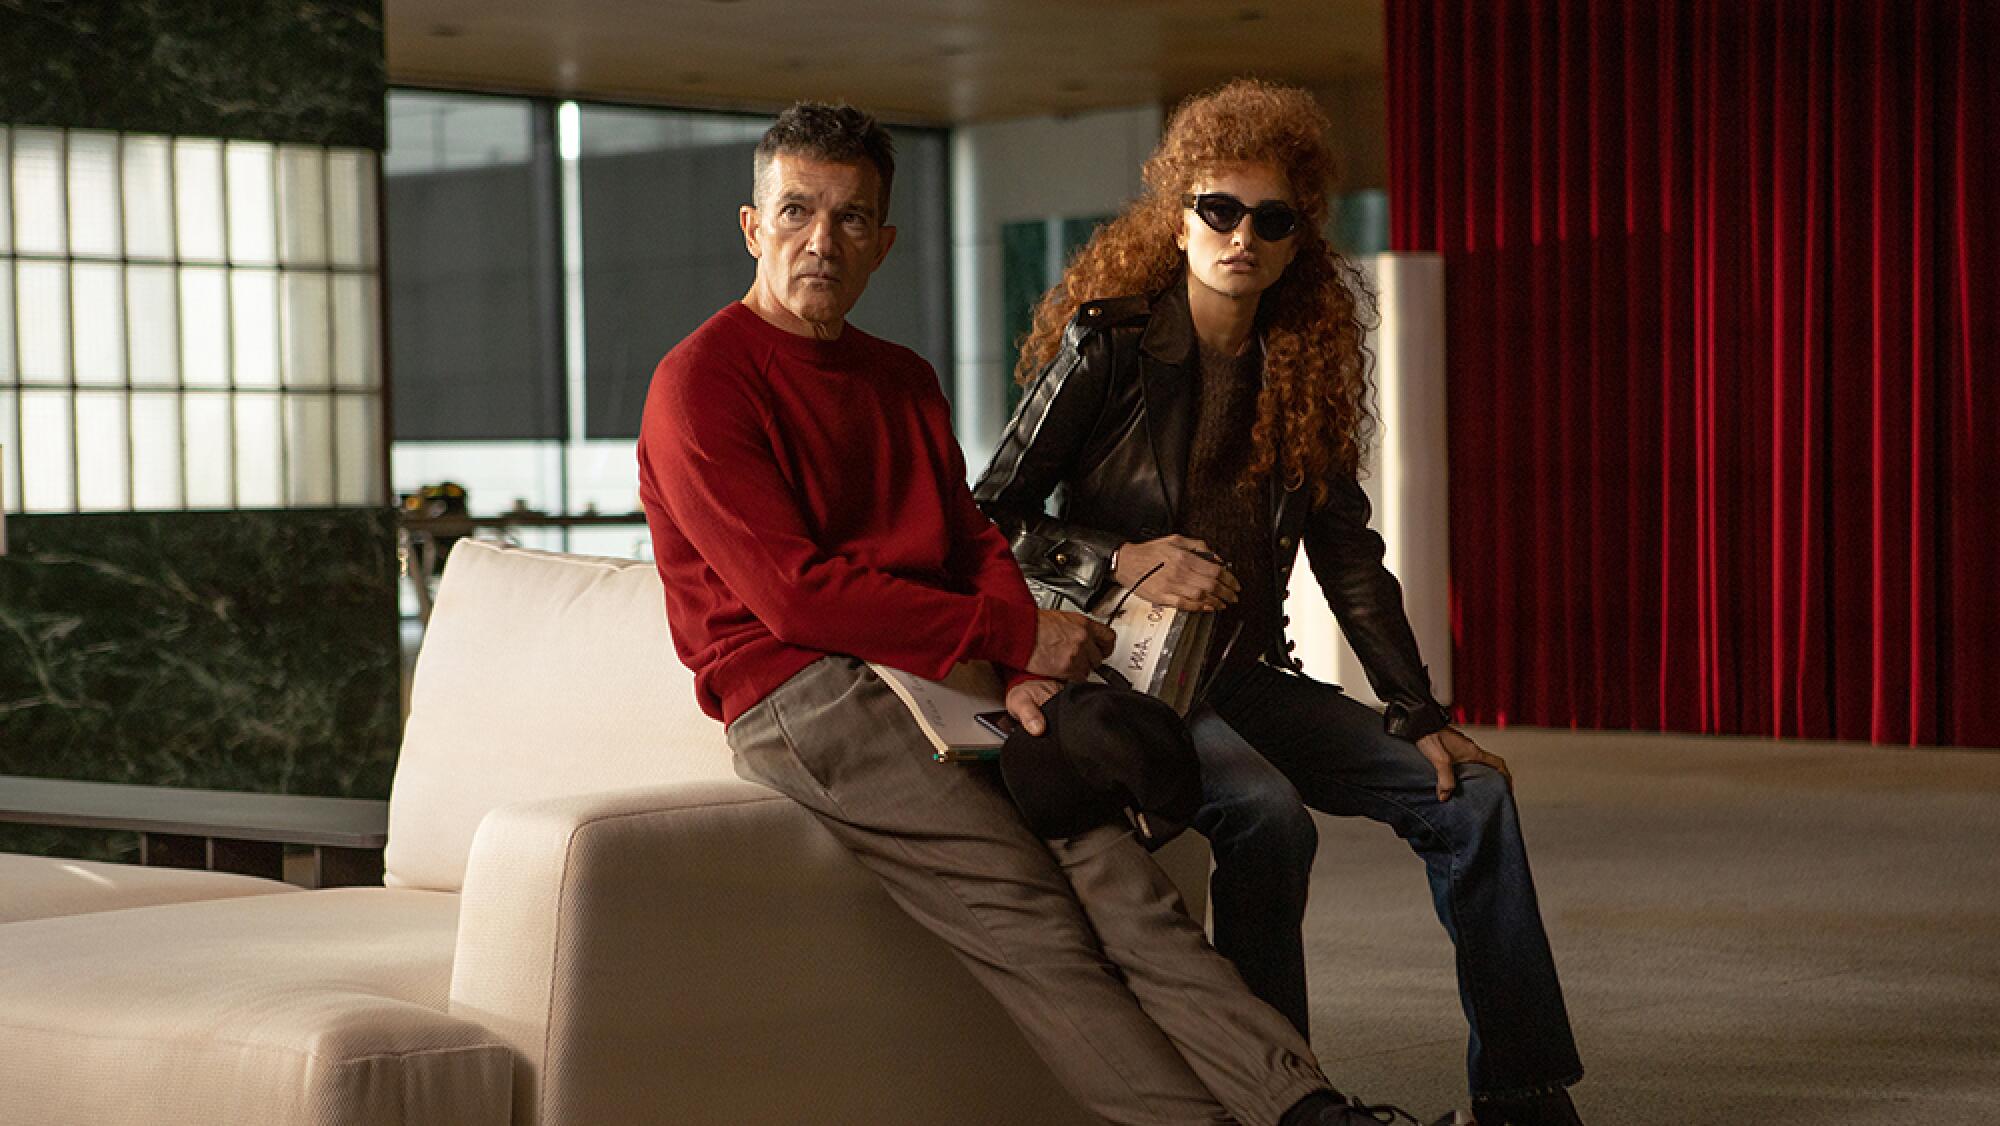 A man in a red sweatshirt and a woman with lots of long curly hair lean on the arm of a white sofa.